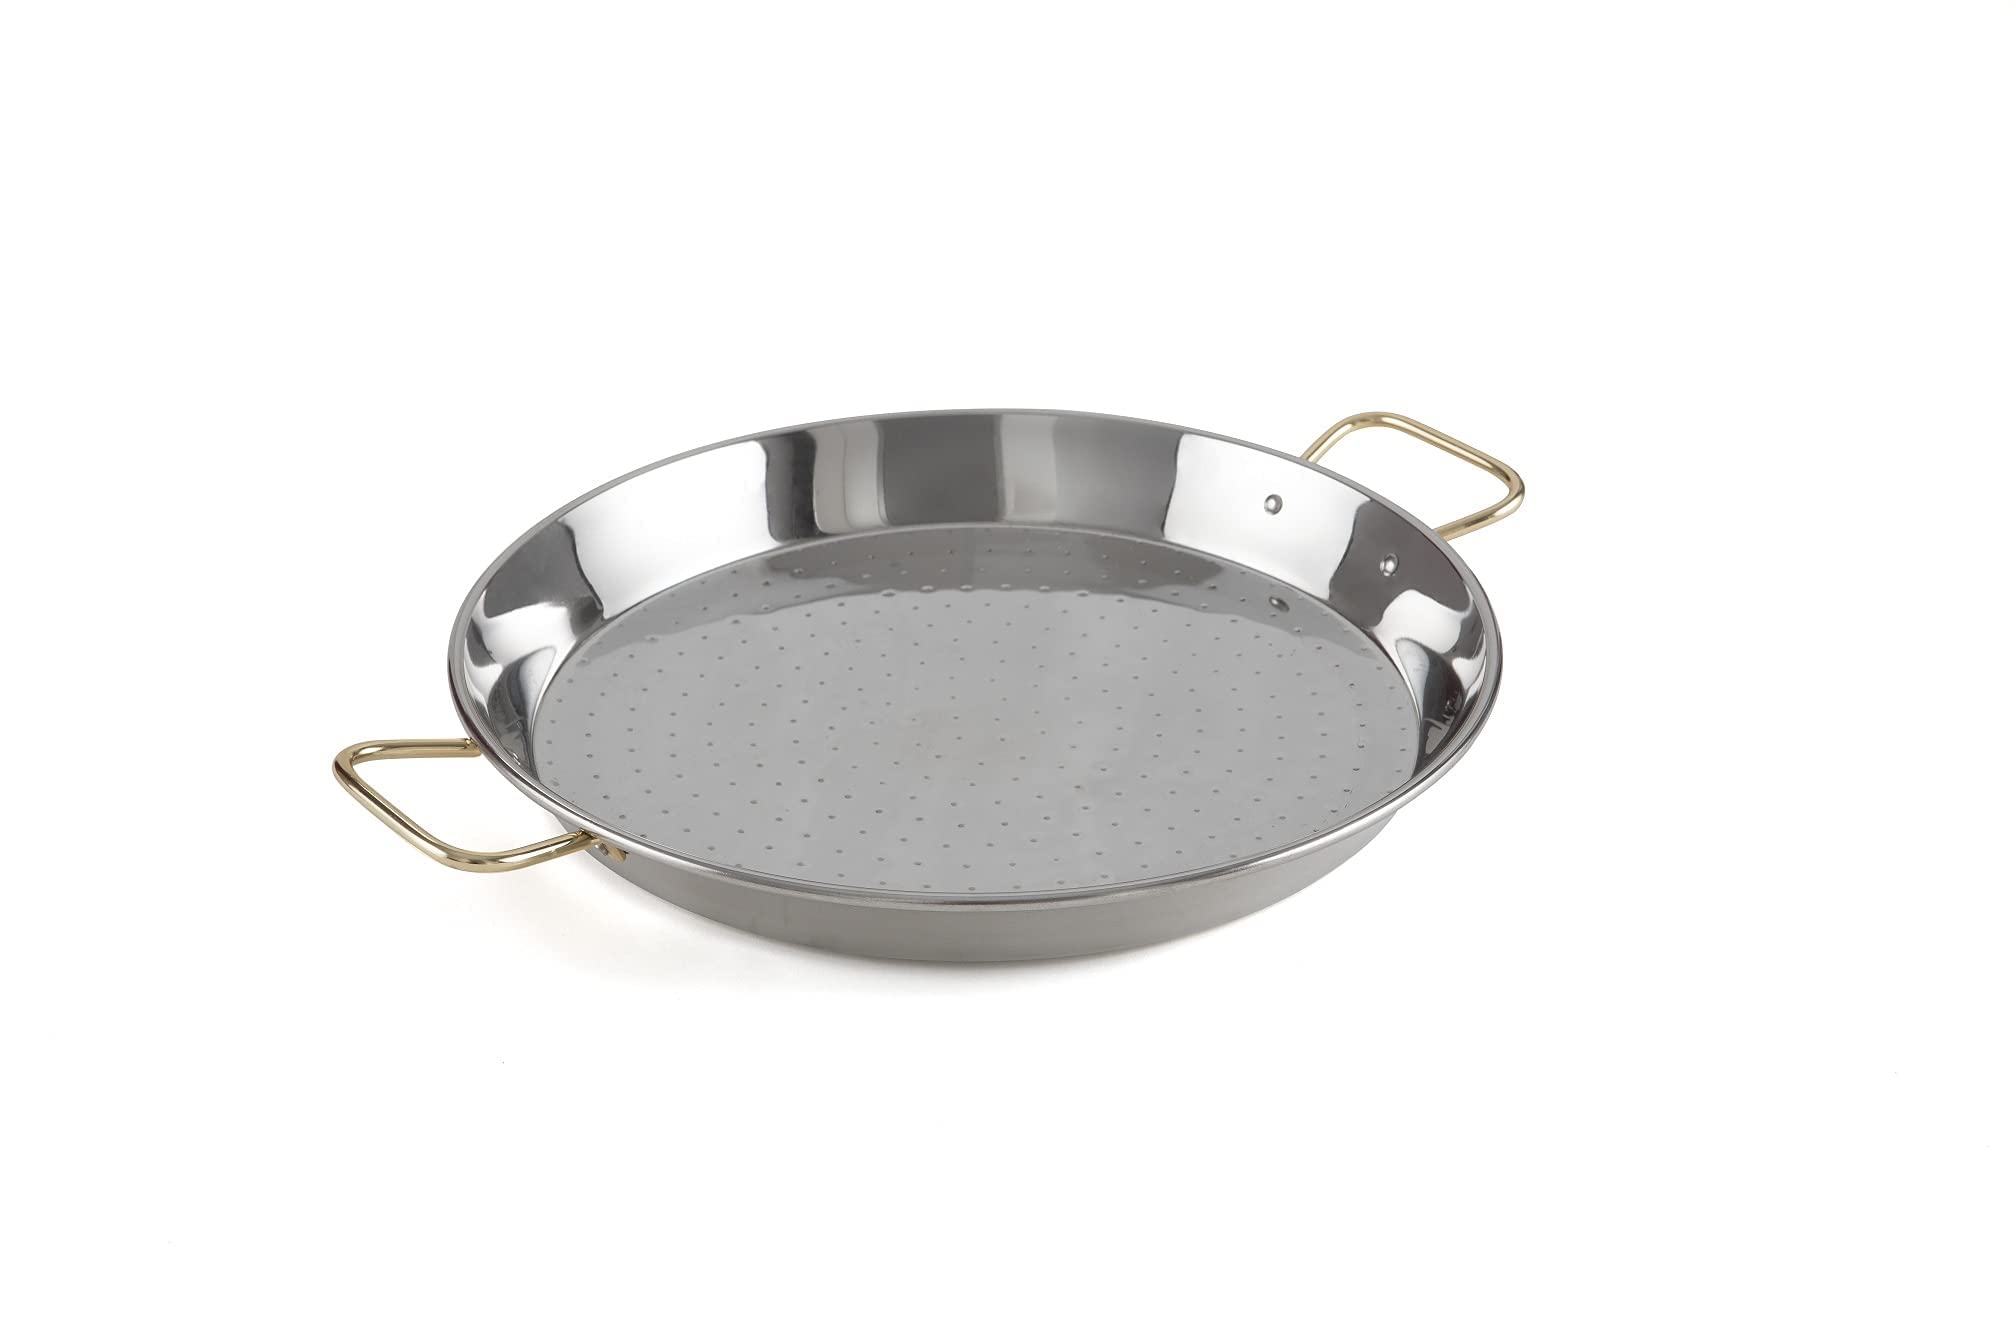 Gourmanity 16 inch Stainless Steel Flat Paella Pan, 40cm Large Stainless Steel Frying Pan Imported from Spain, Dishwasher and Oven Safe, Paellera with Gold Plated Handles, 9 Servings, Made by Garcima